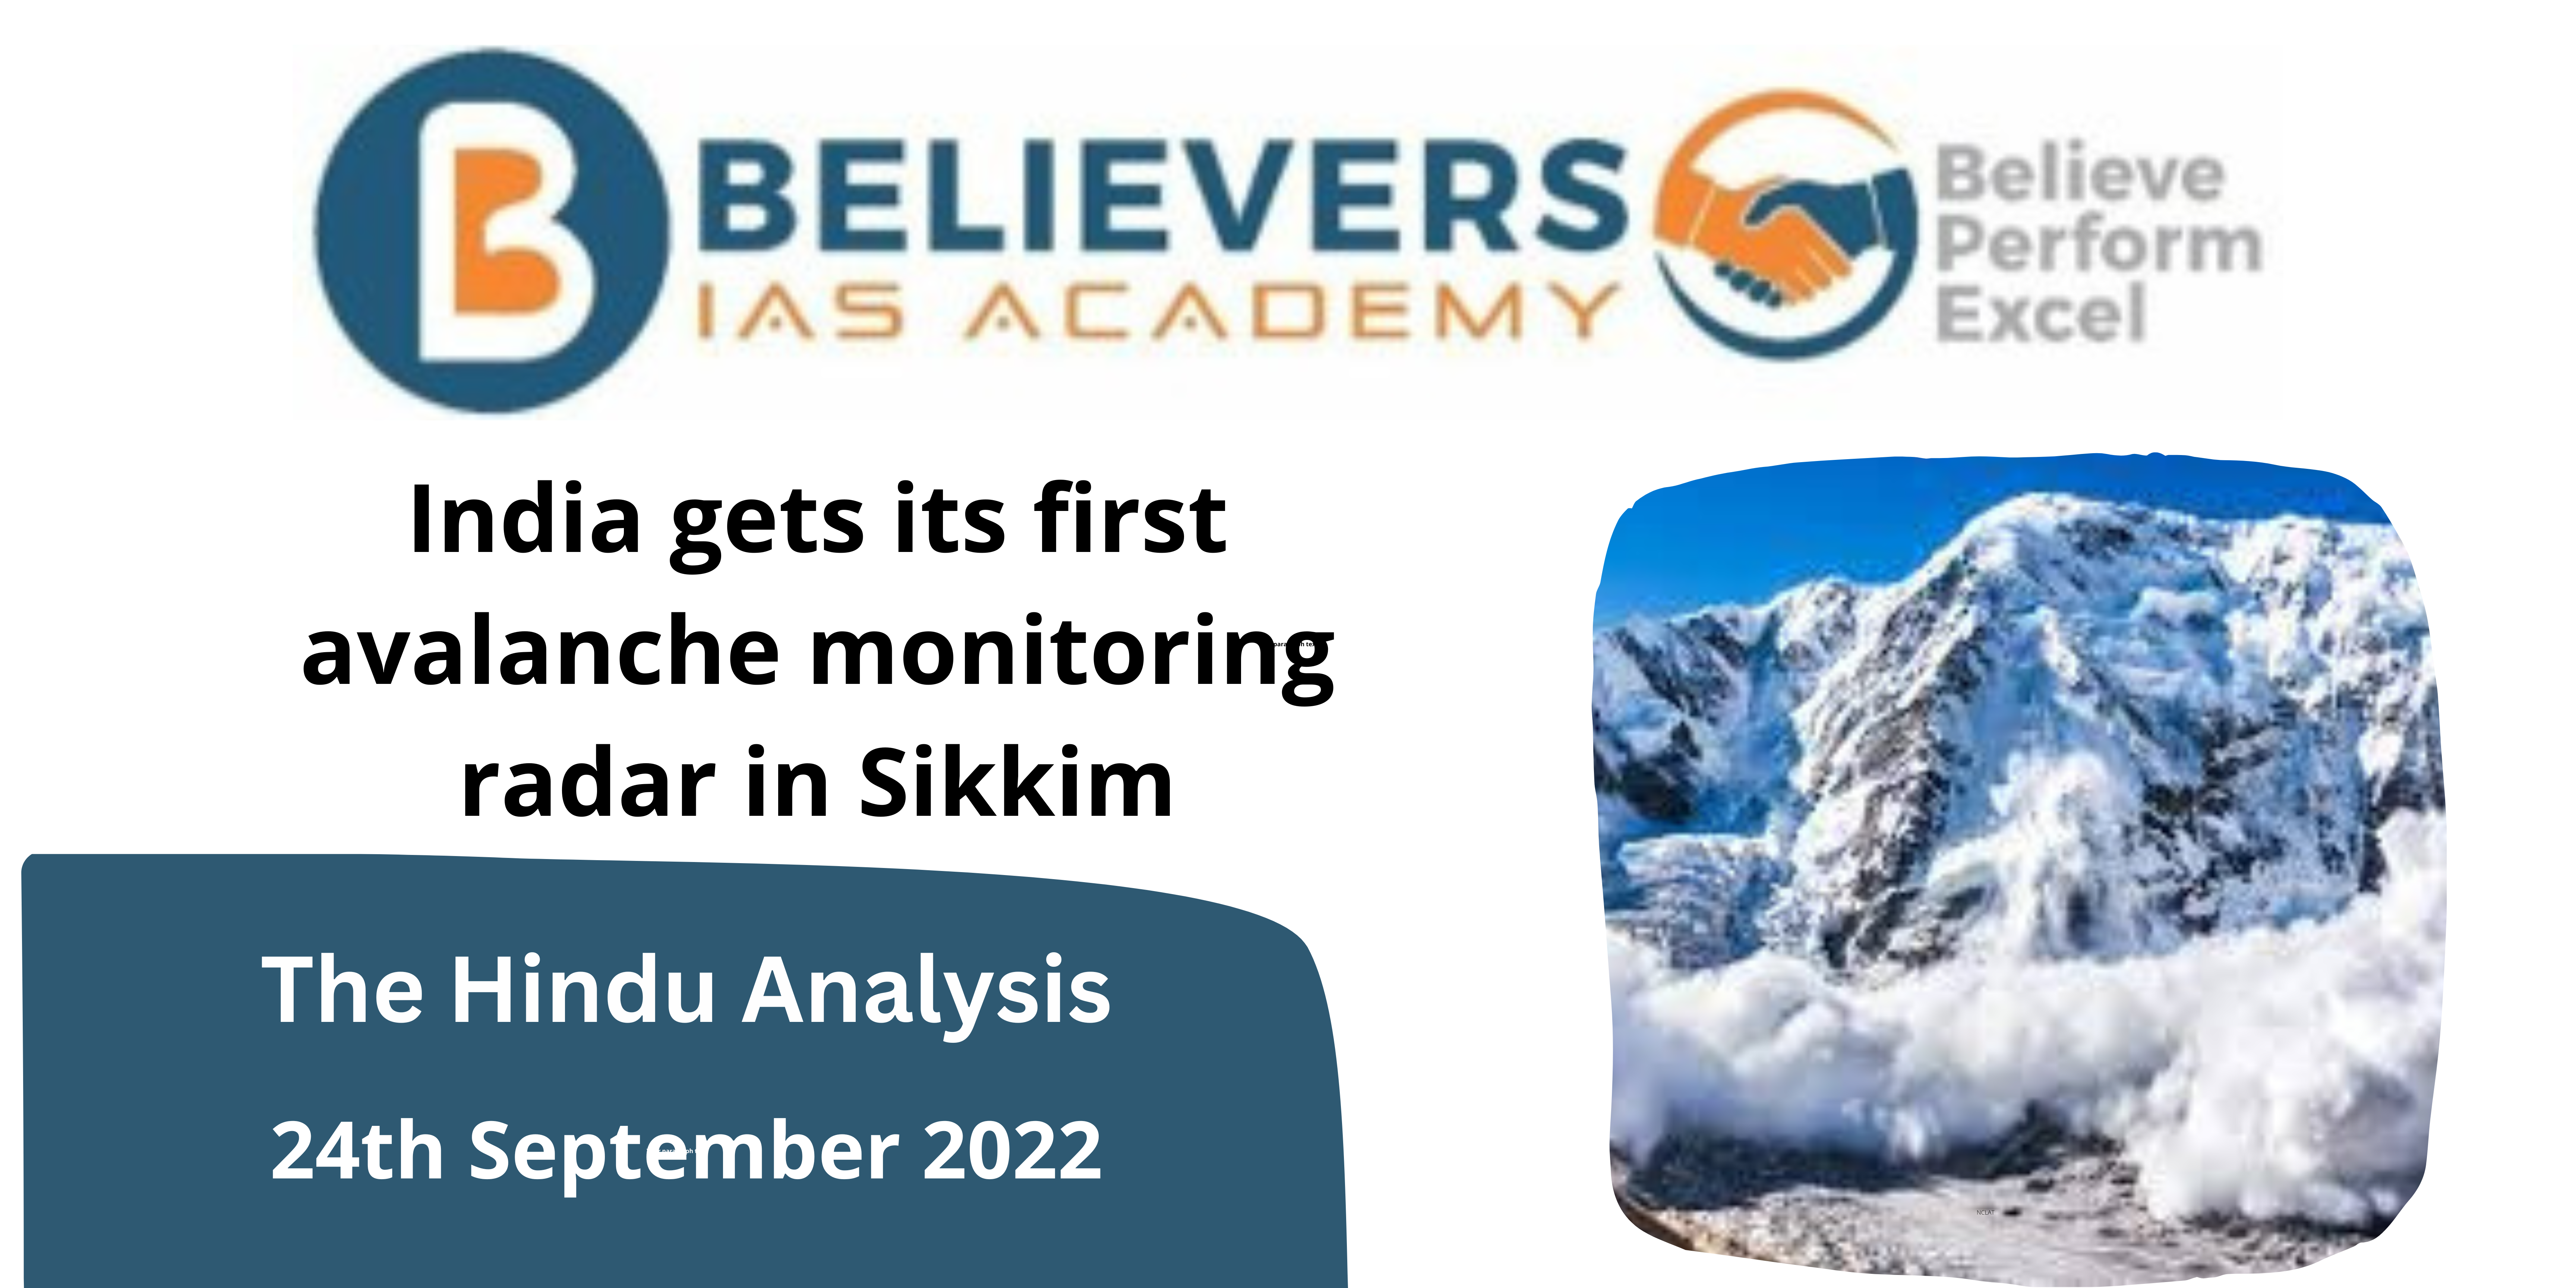 India gets its first avalanche monitoring radar in Sikkim